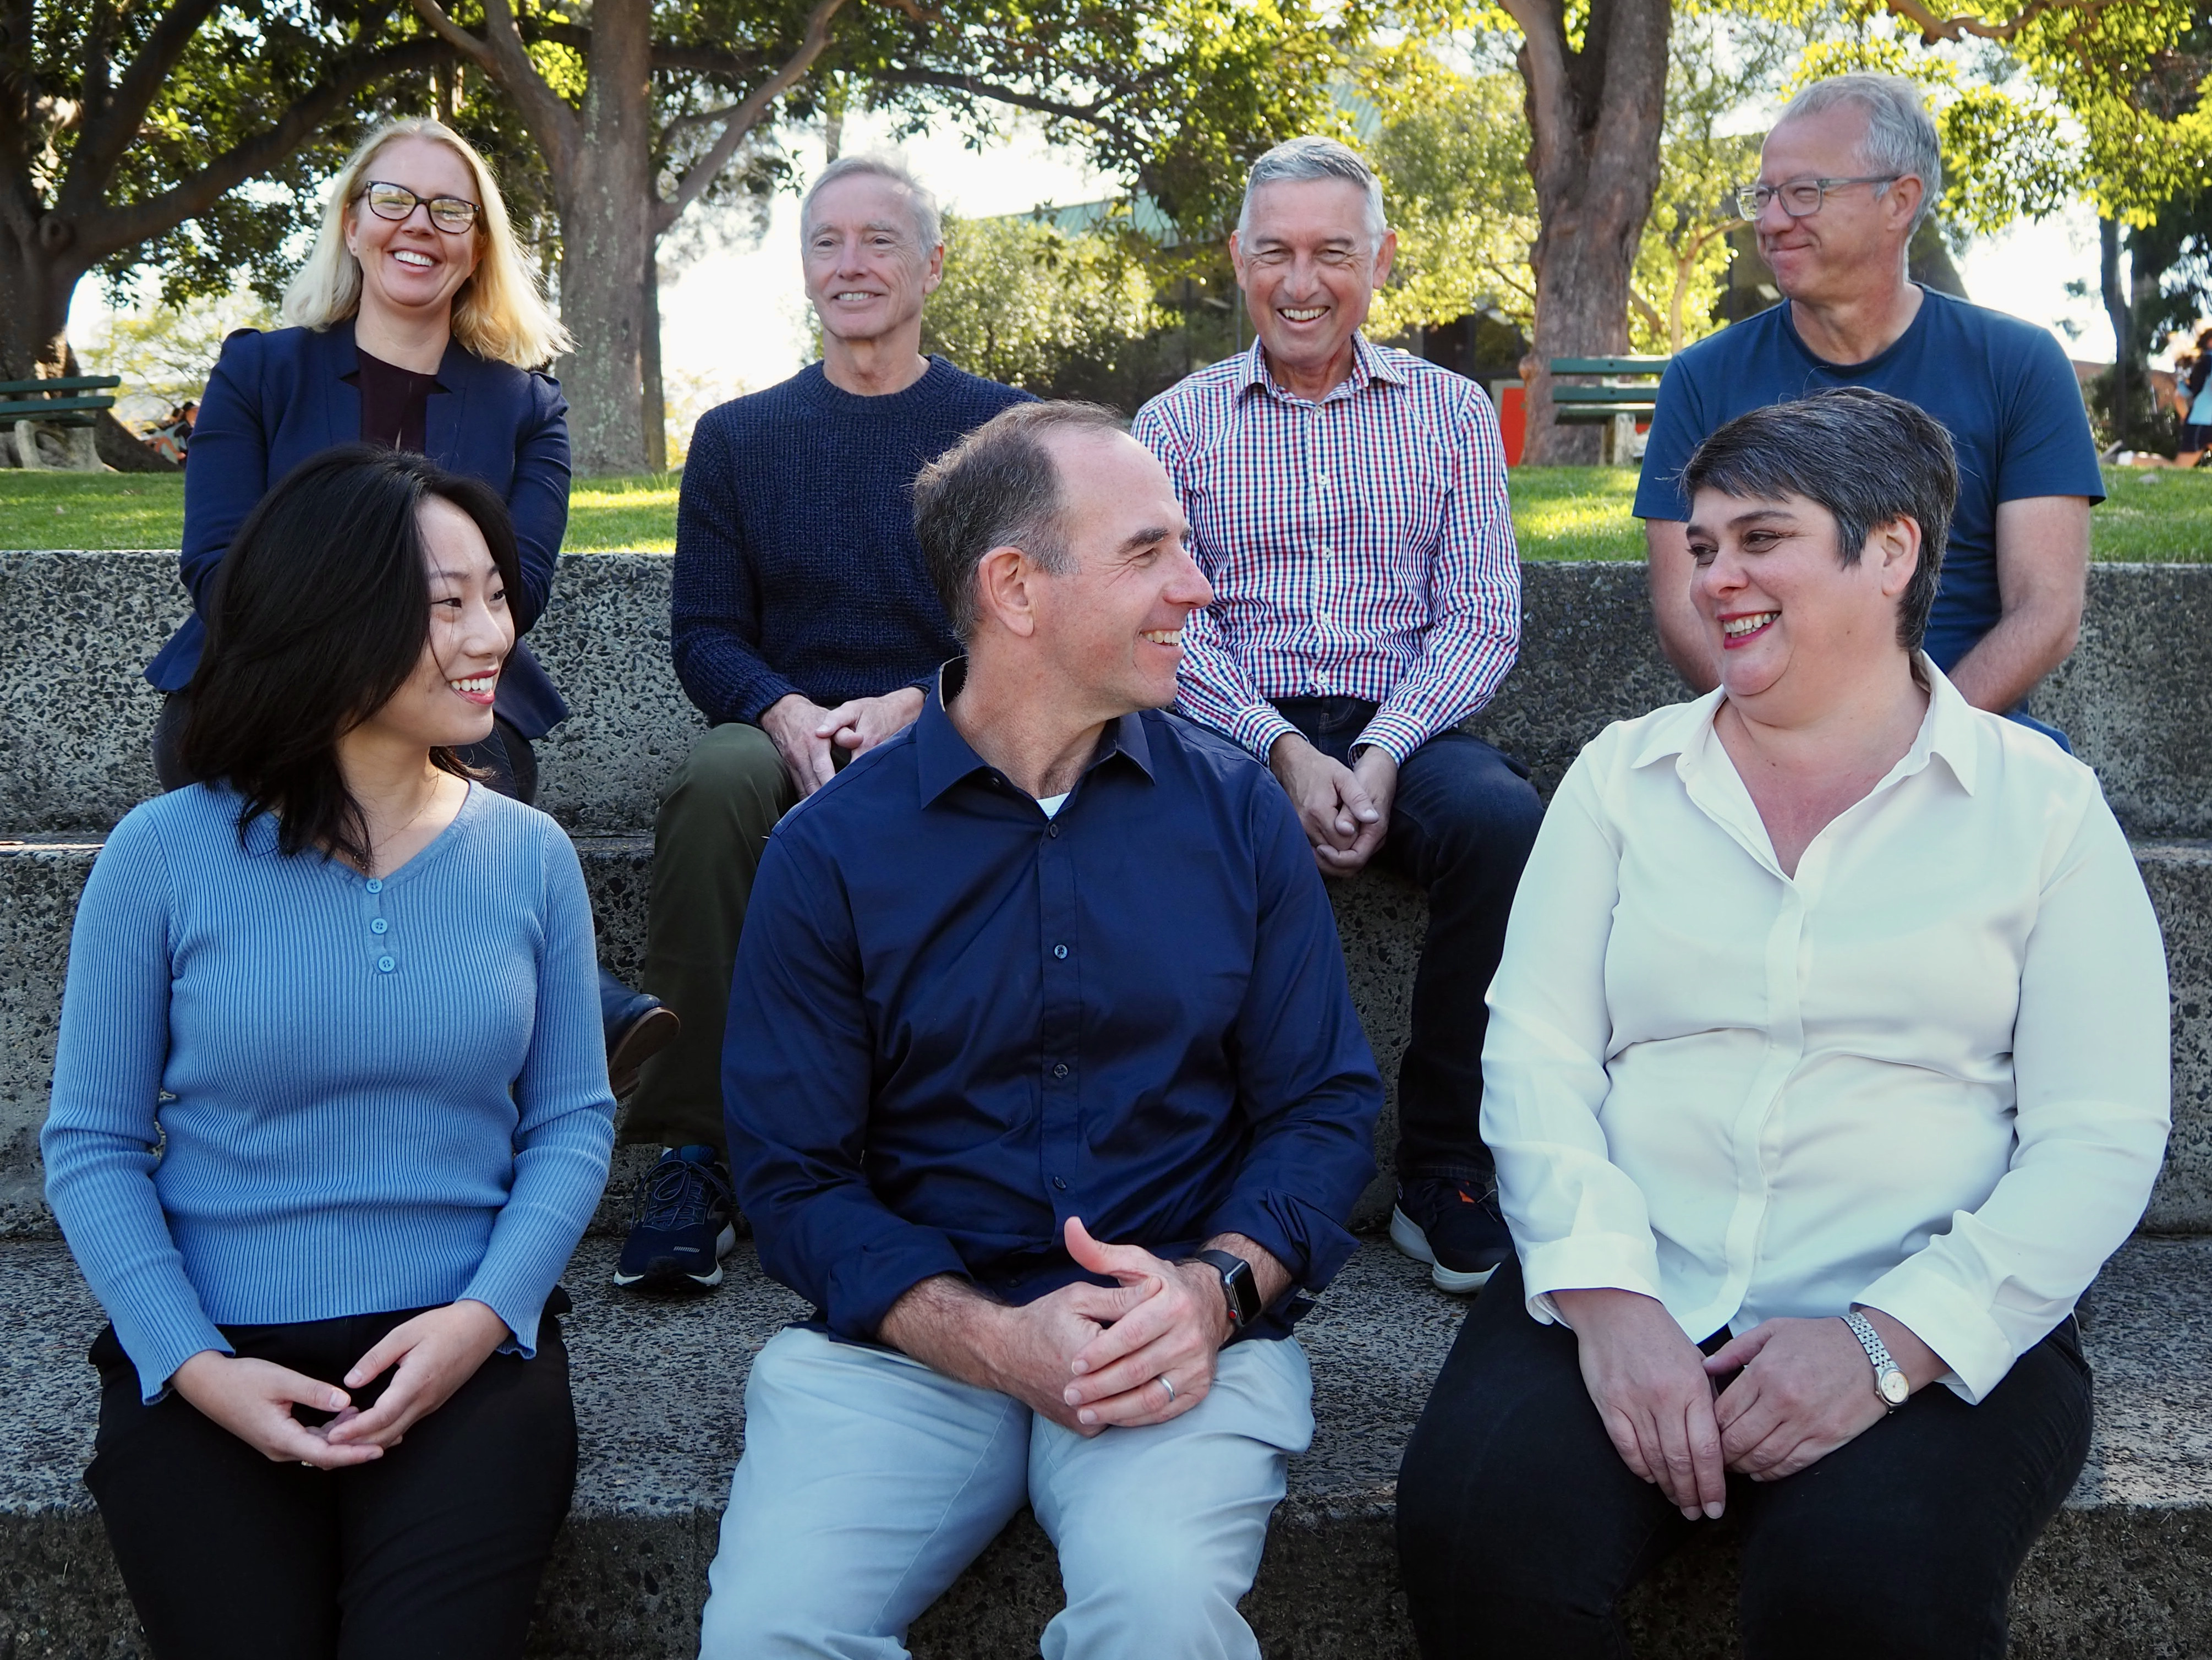 Main Sequence’s team (top row from left to right) Viringa Crawter, Bill Bartee, Mike Nicholls, Phil Morle; (bottom row from left to right) Stella Xu, Mike Zimmerman and Jen Baxter